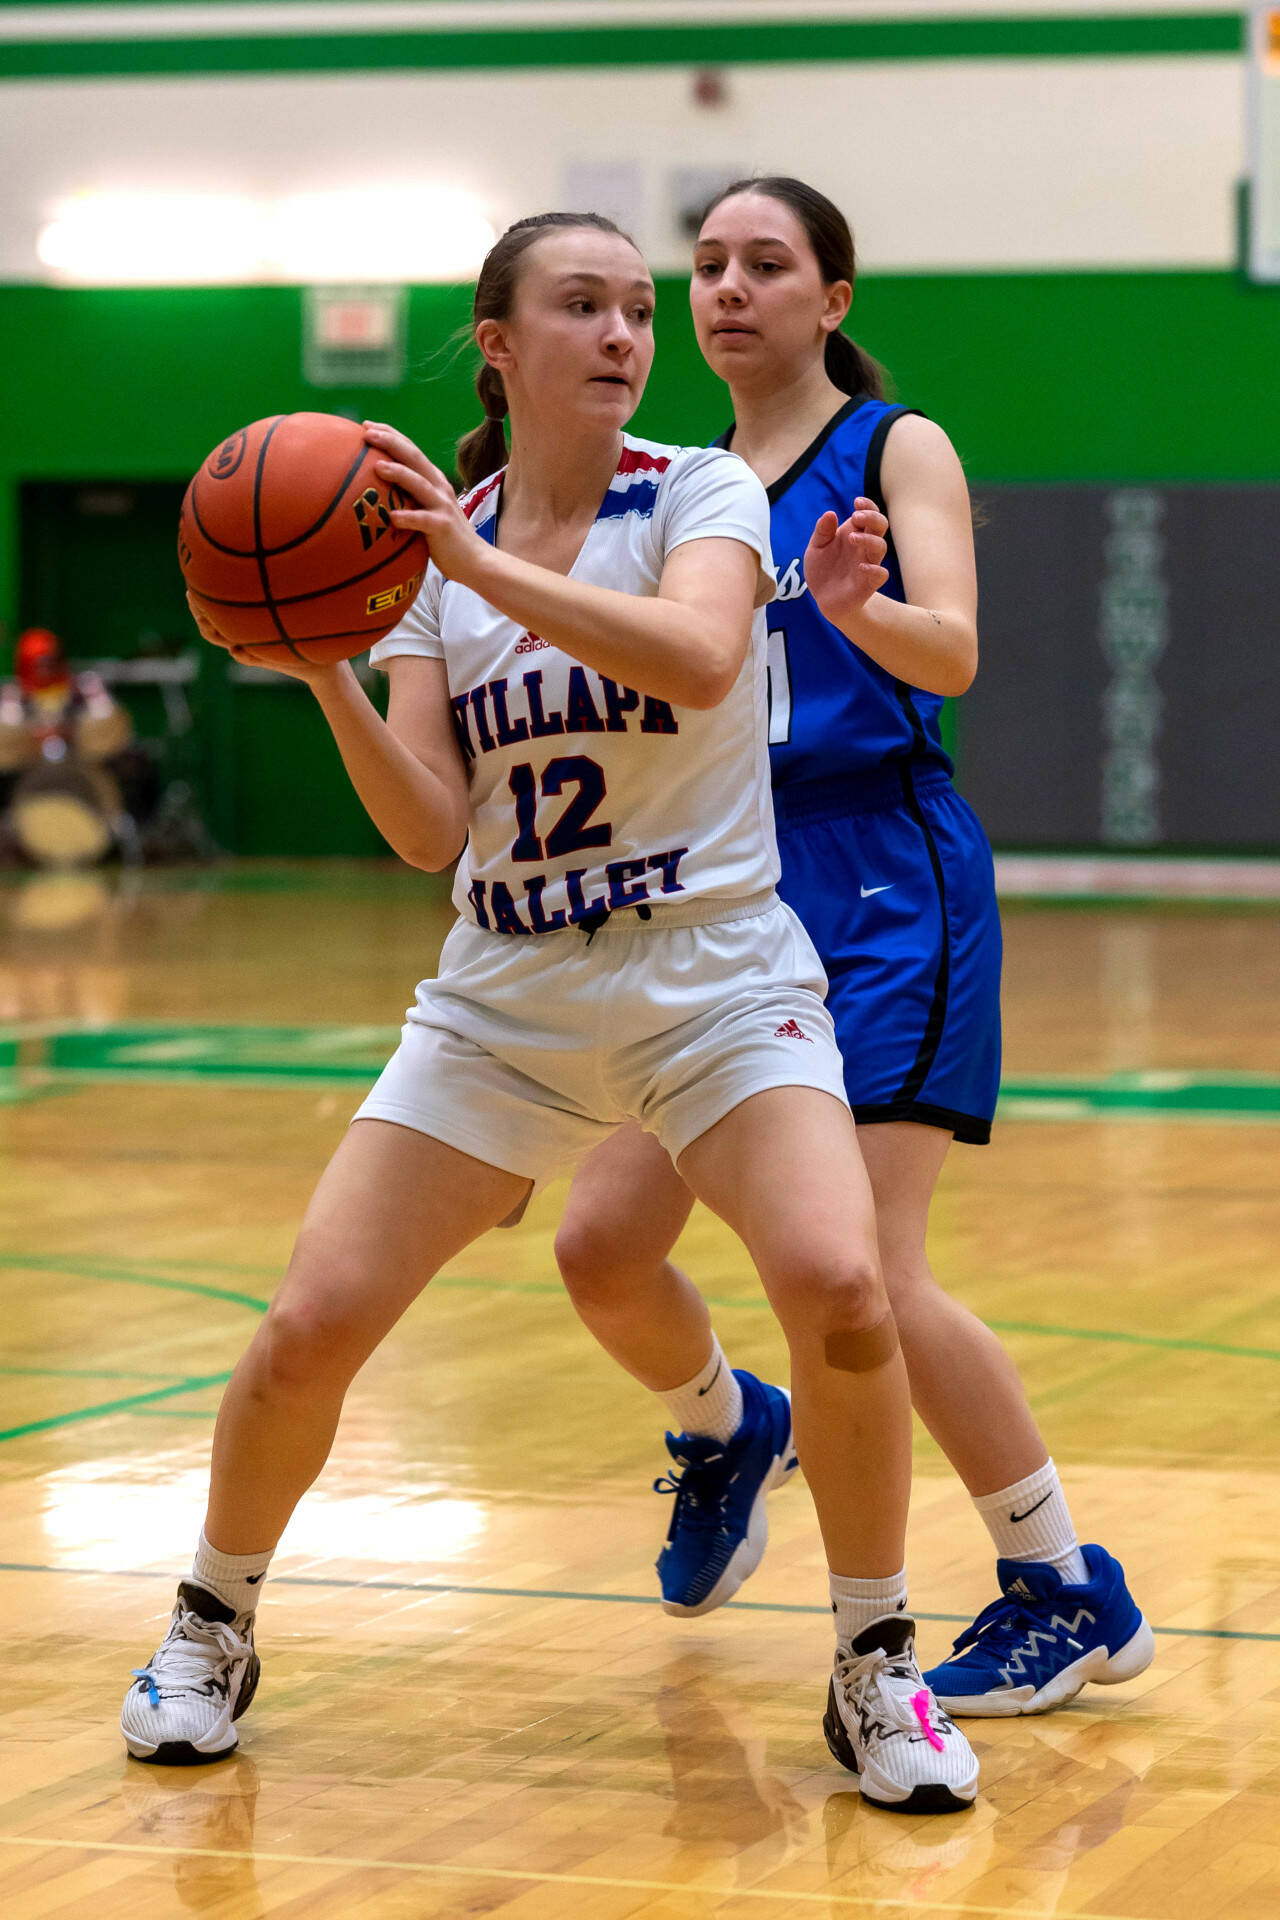 PHOTO BY FOREST WORGUM Willapa Valley freshman Lauren Matlock (12) looks to pass during the Vikings’ 51-30 victory over Orcas Island in a 1B State playoff game on Saturday in Tumwater.